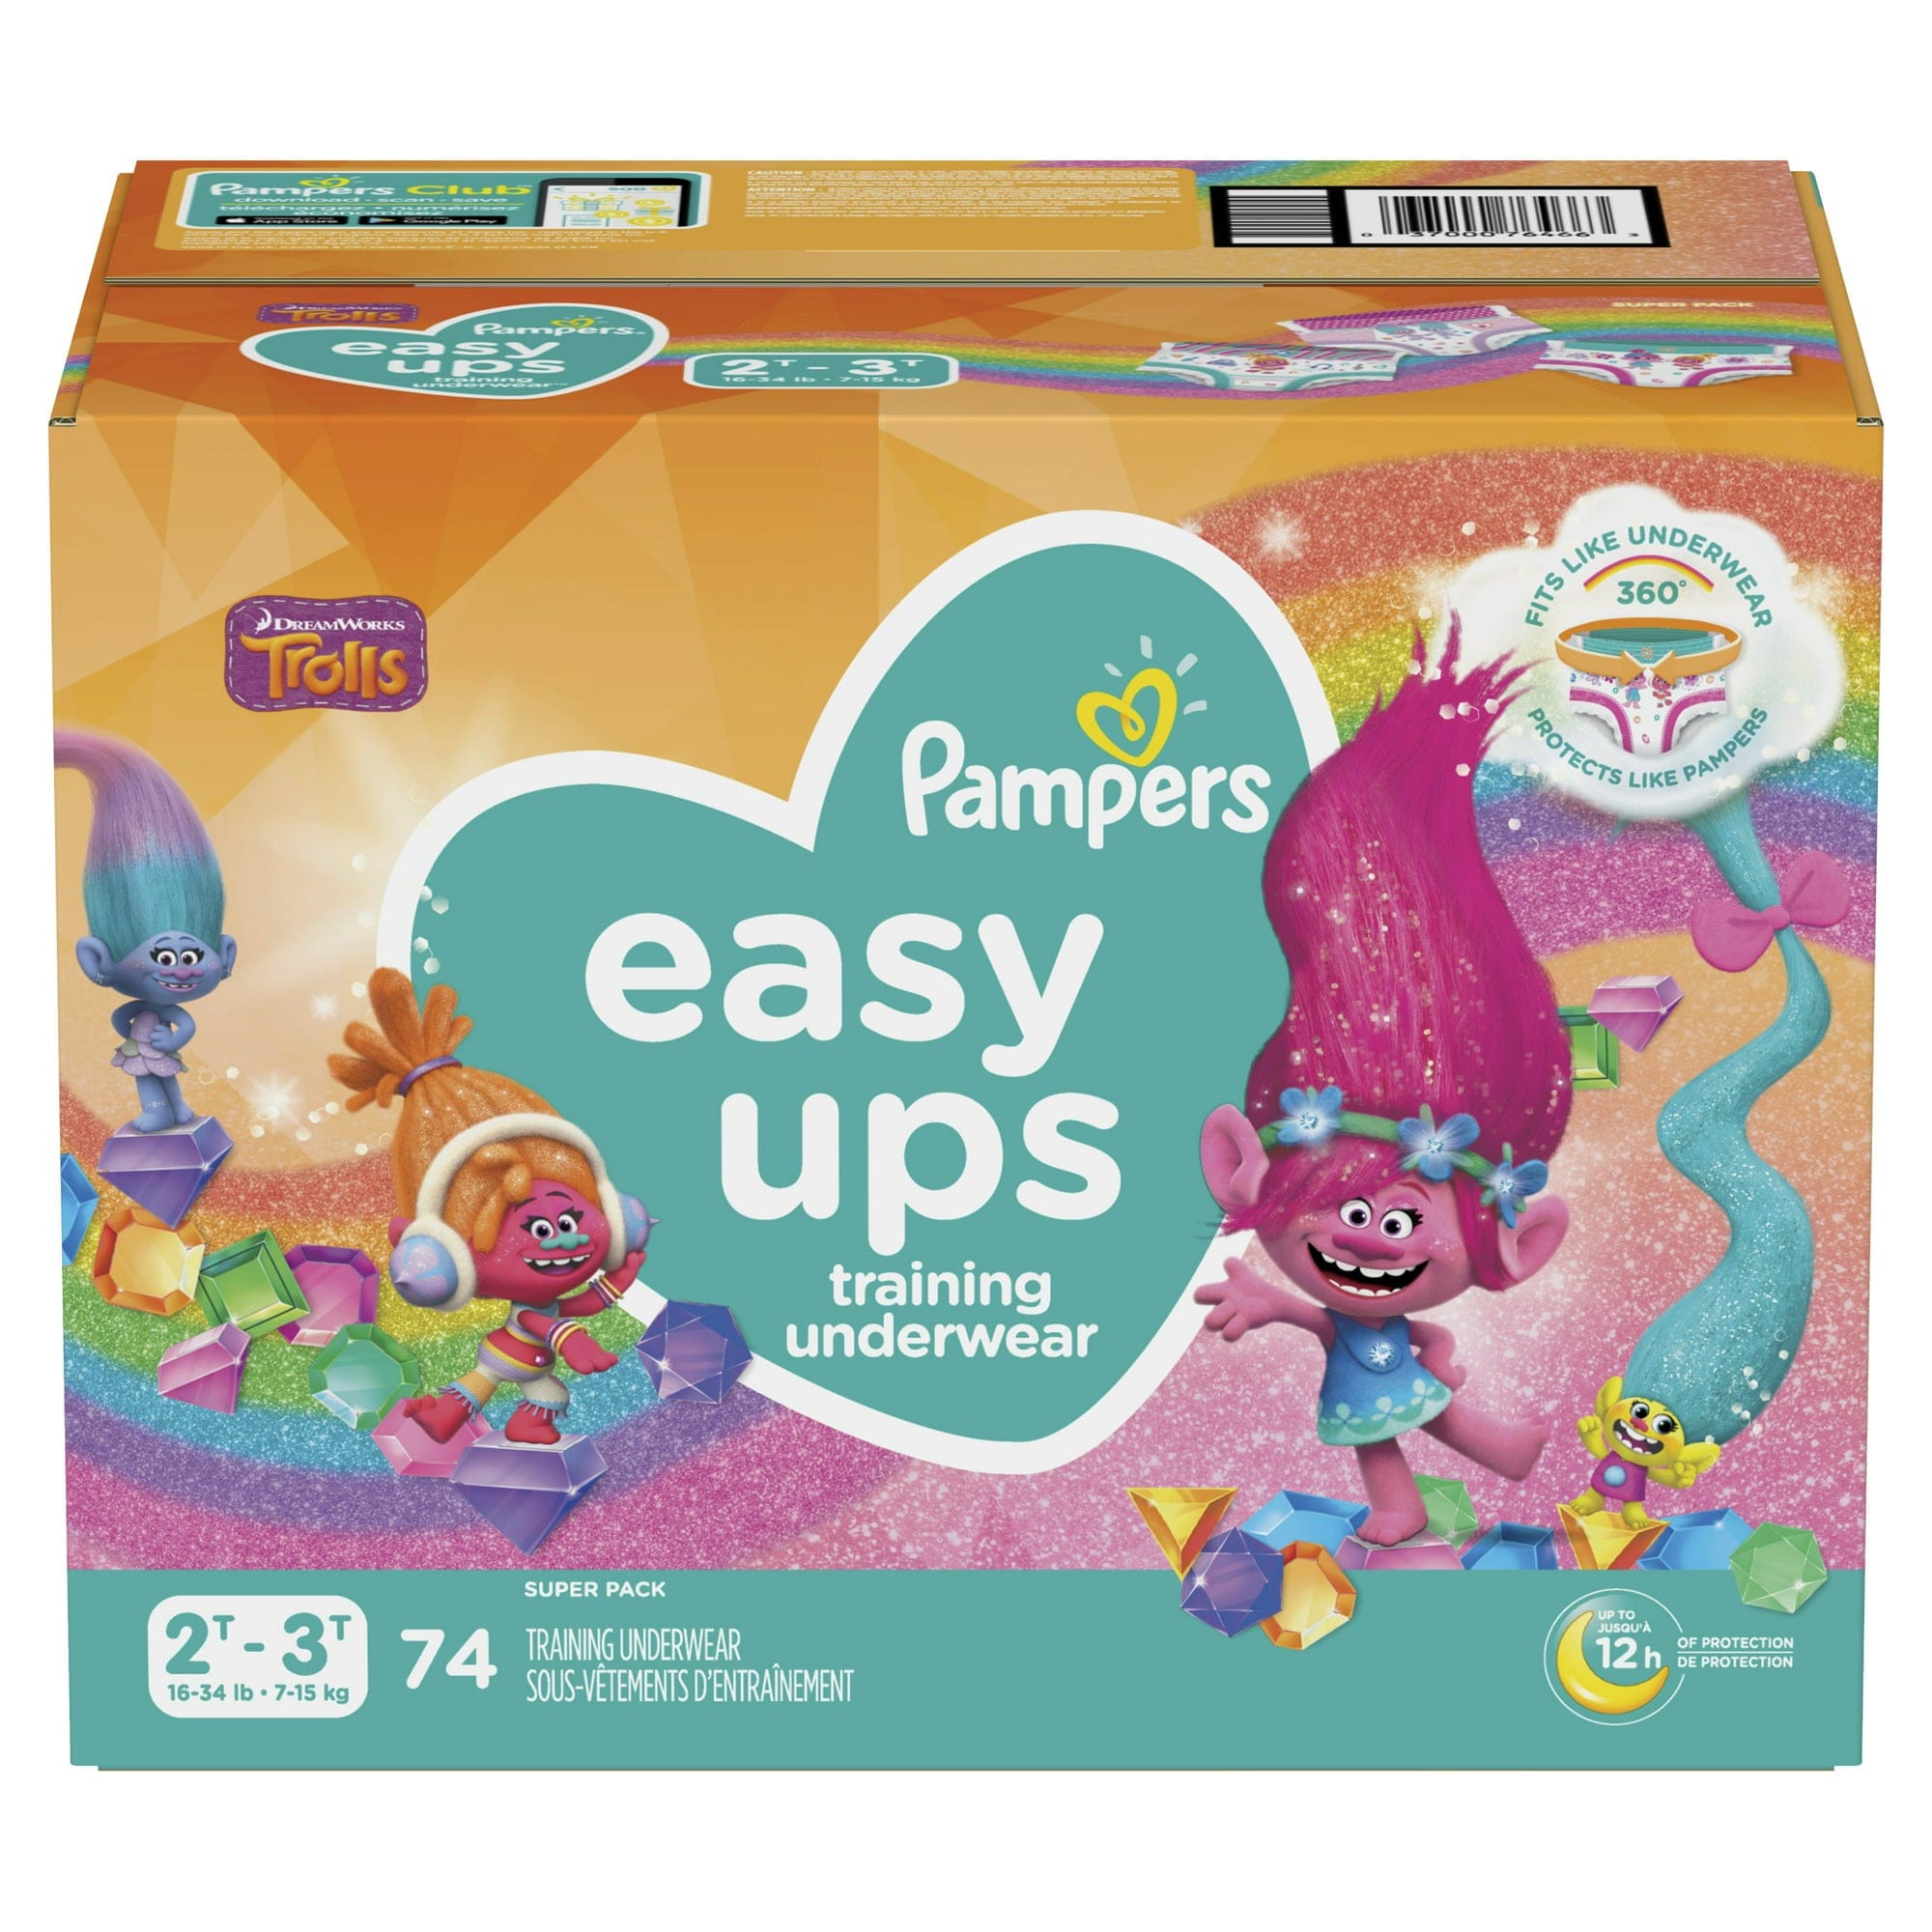 Pampers Easy Ups Training Underwear Boys Size 4 2T-3T 25 Count